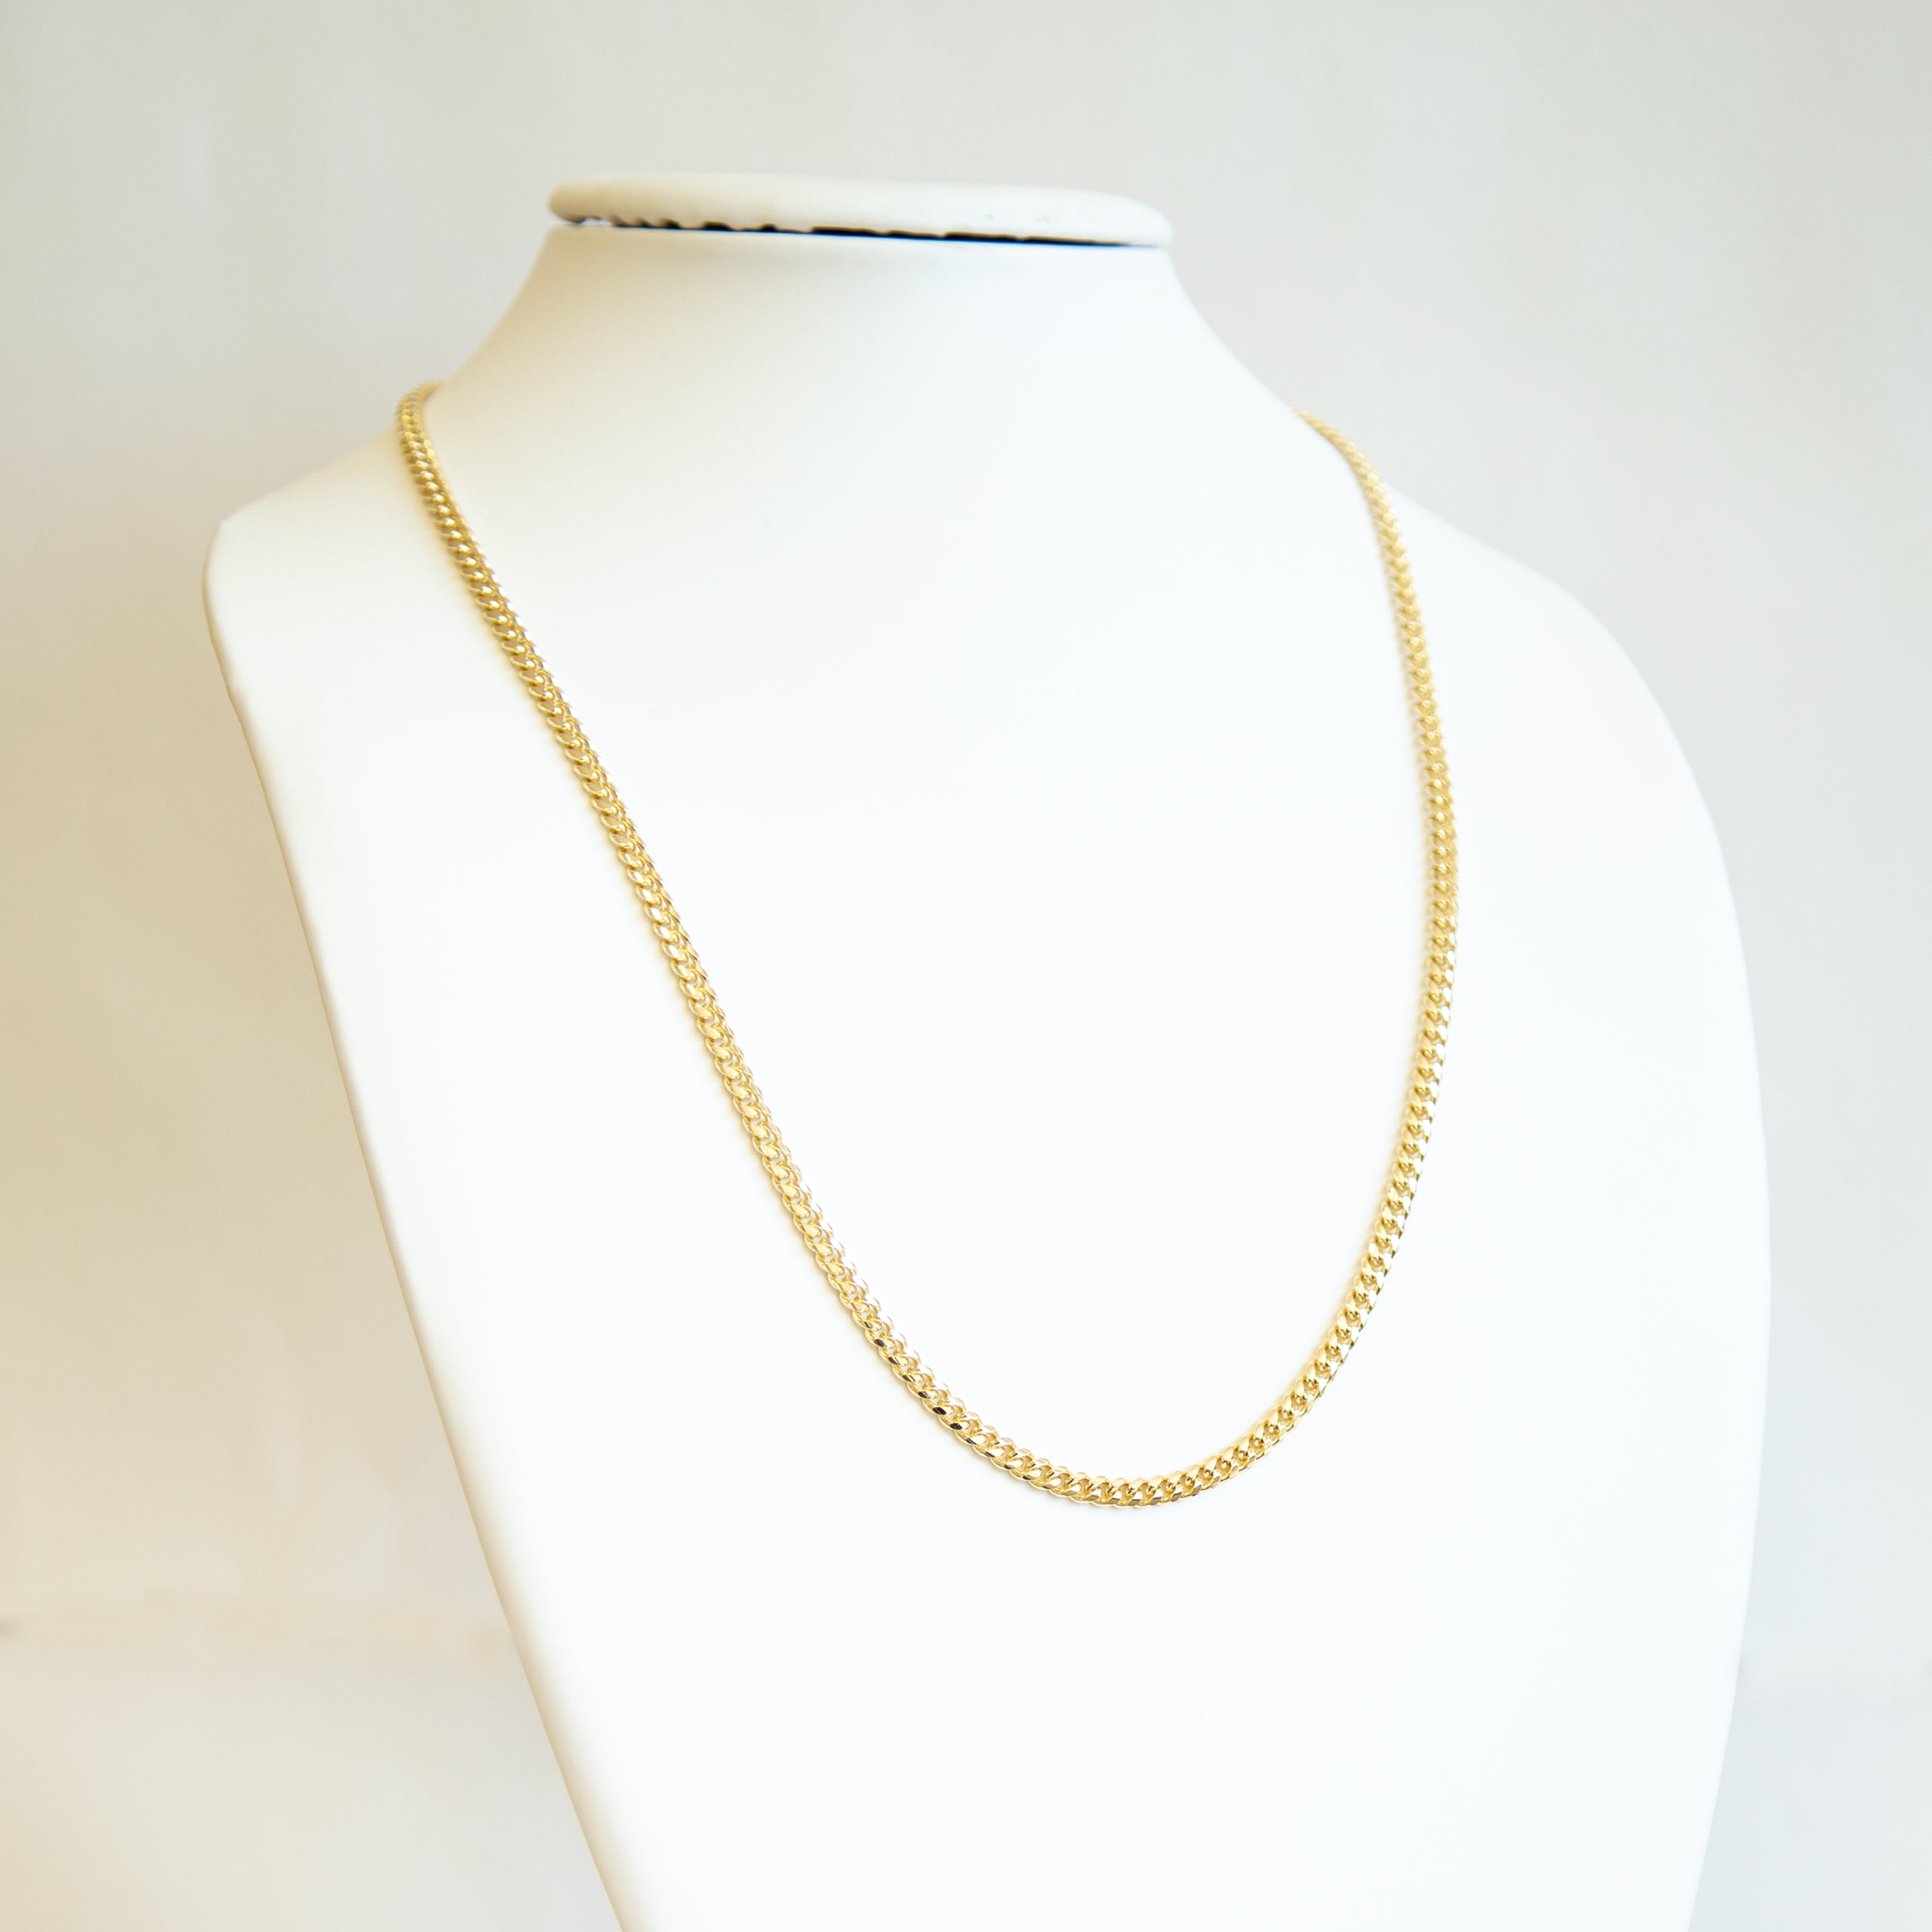 CHAIN NECKLACE - Curb 24"